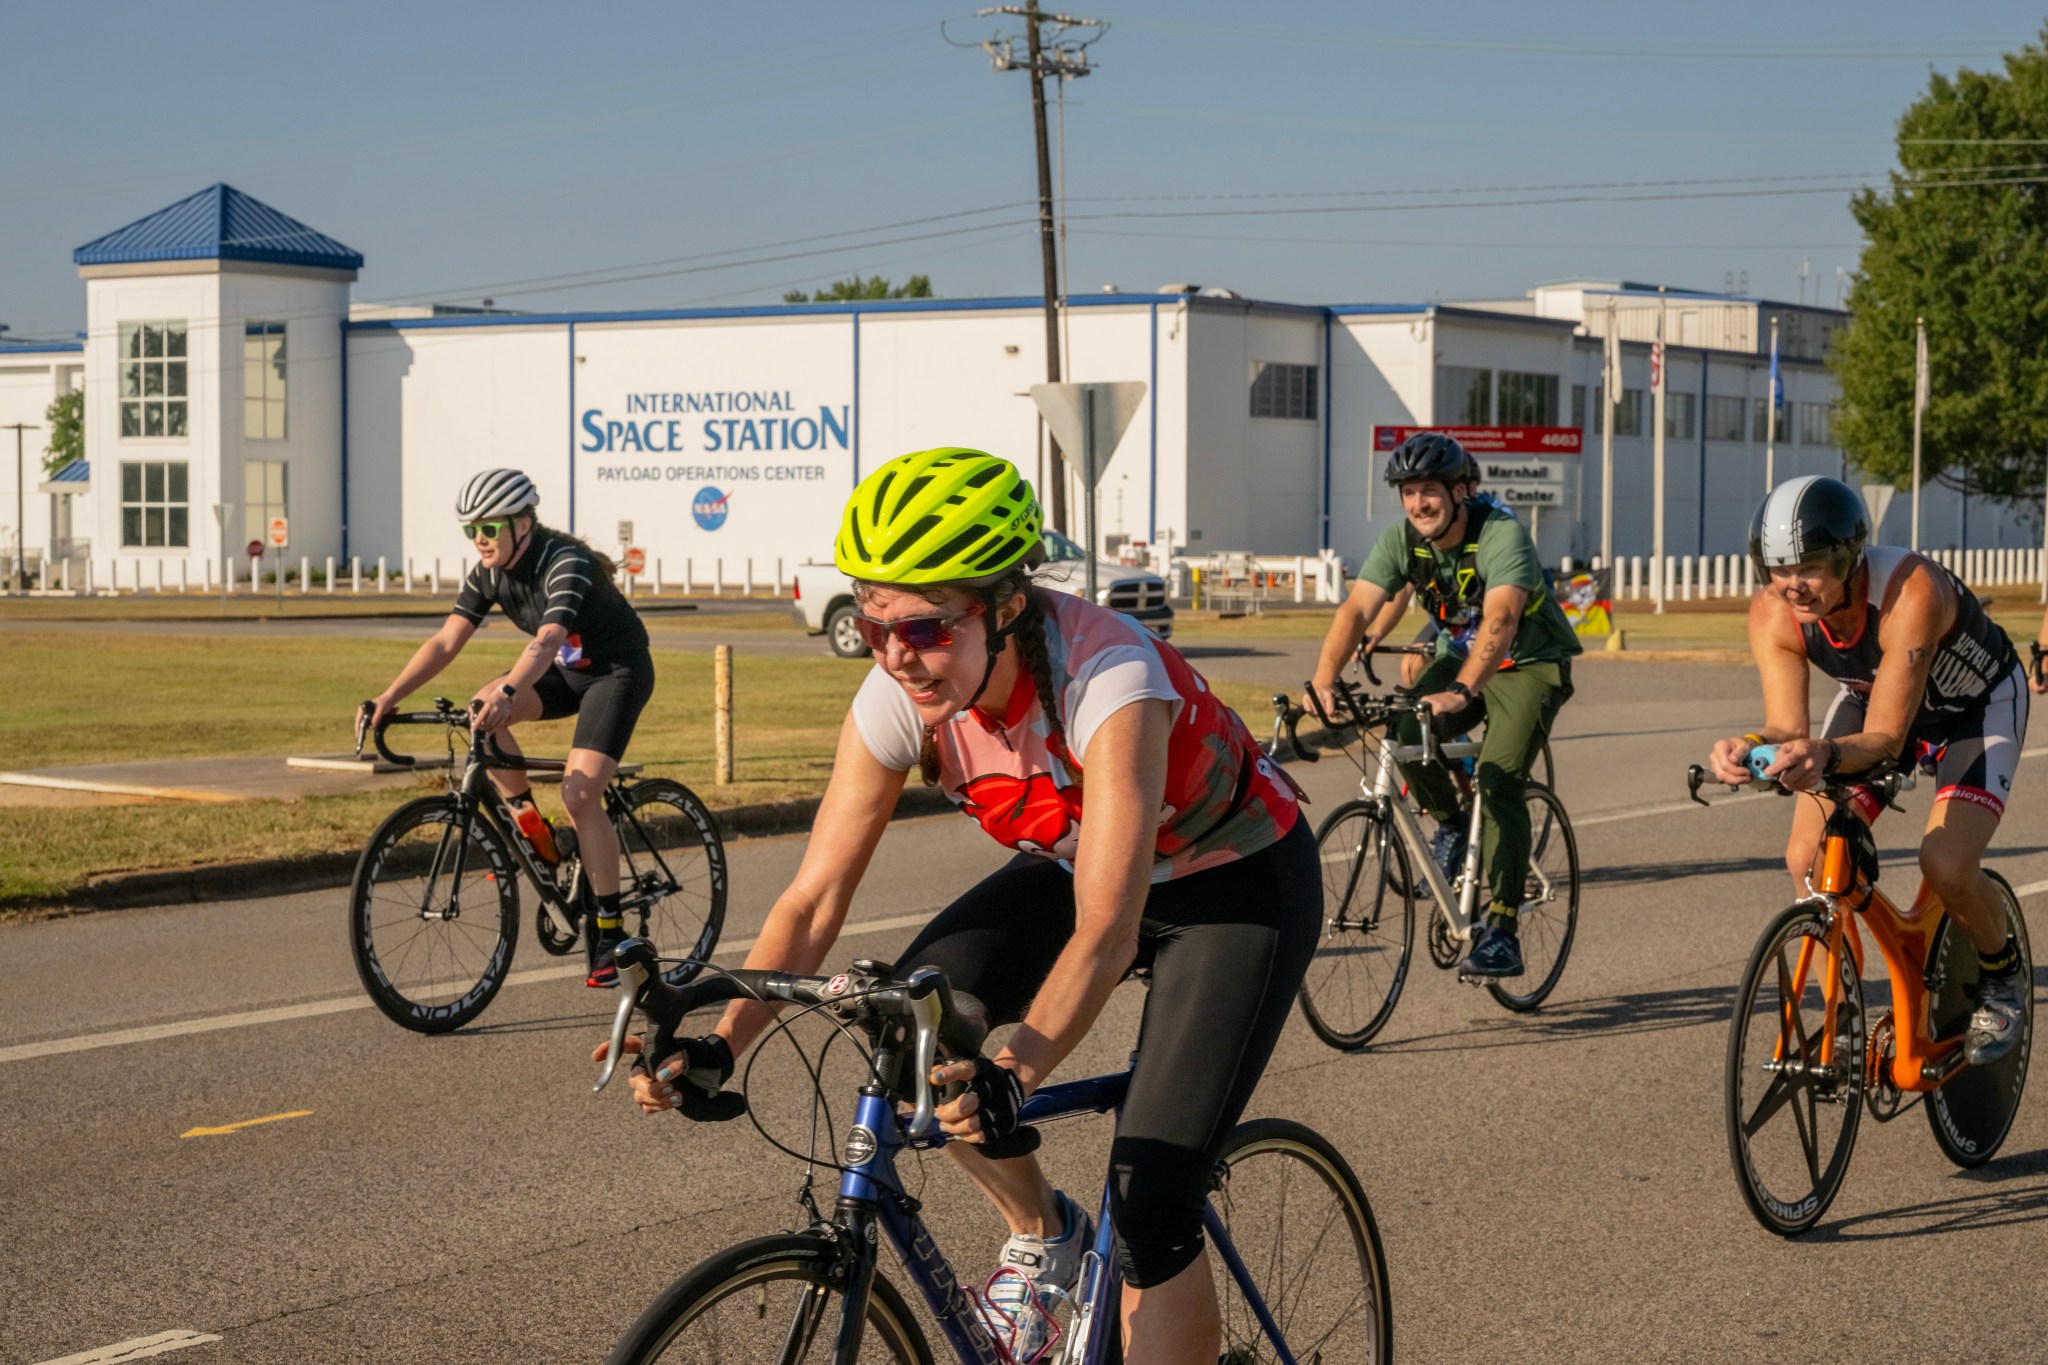 Cyclists compete during the bicycle portion of “Racin’ the Station.”